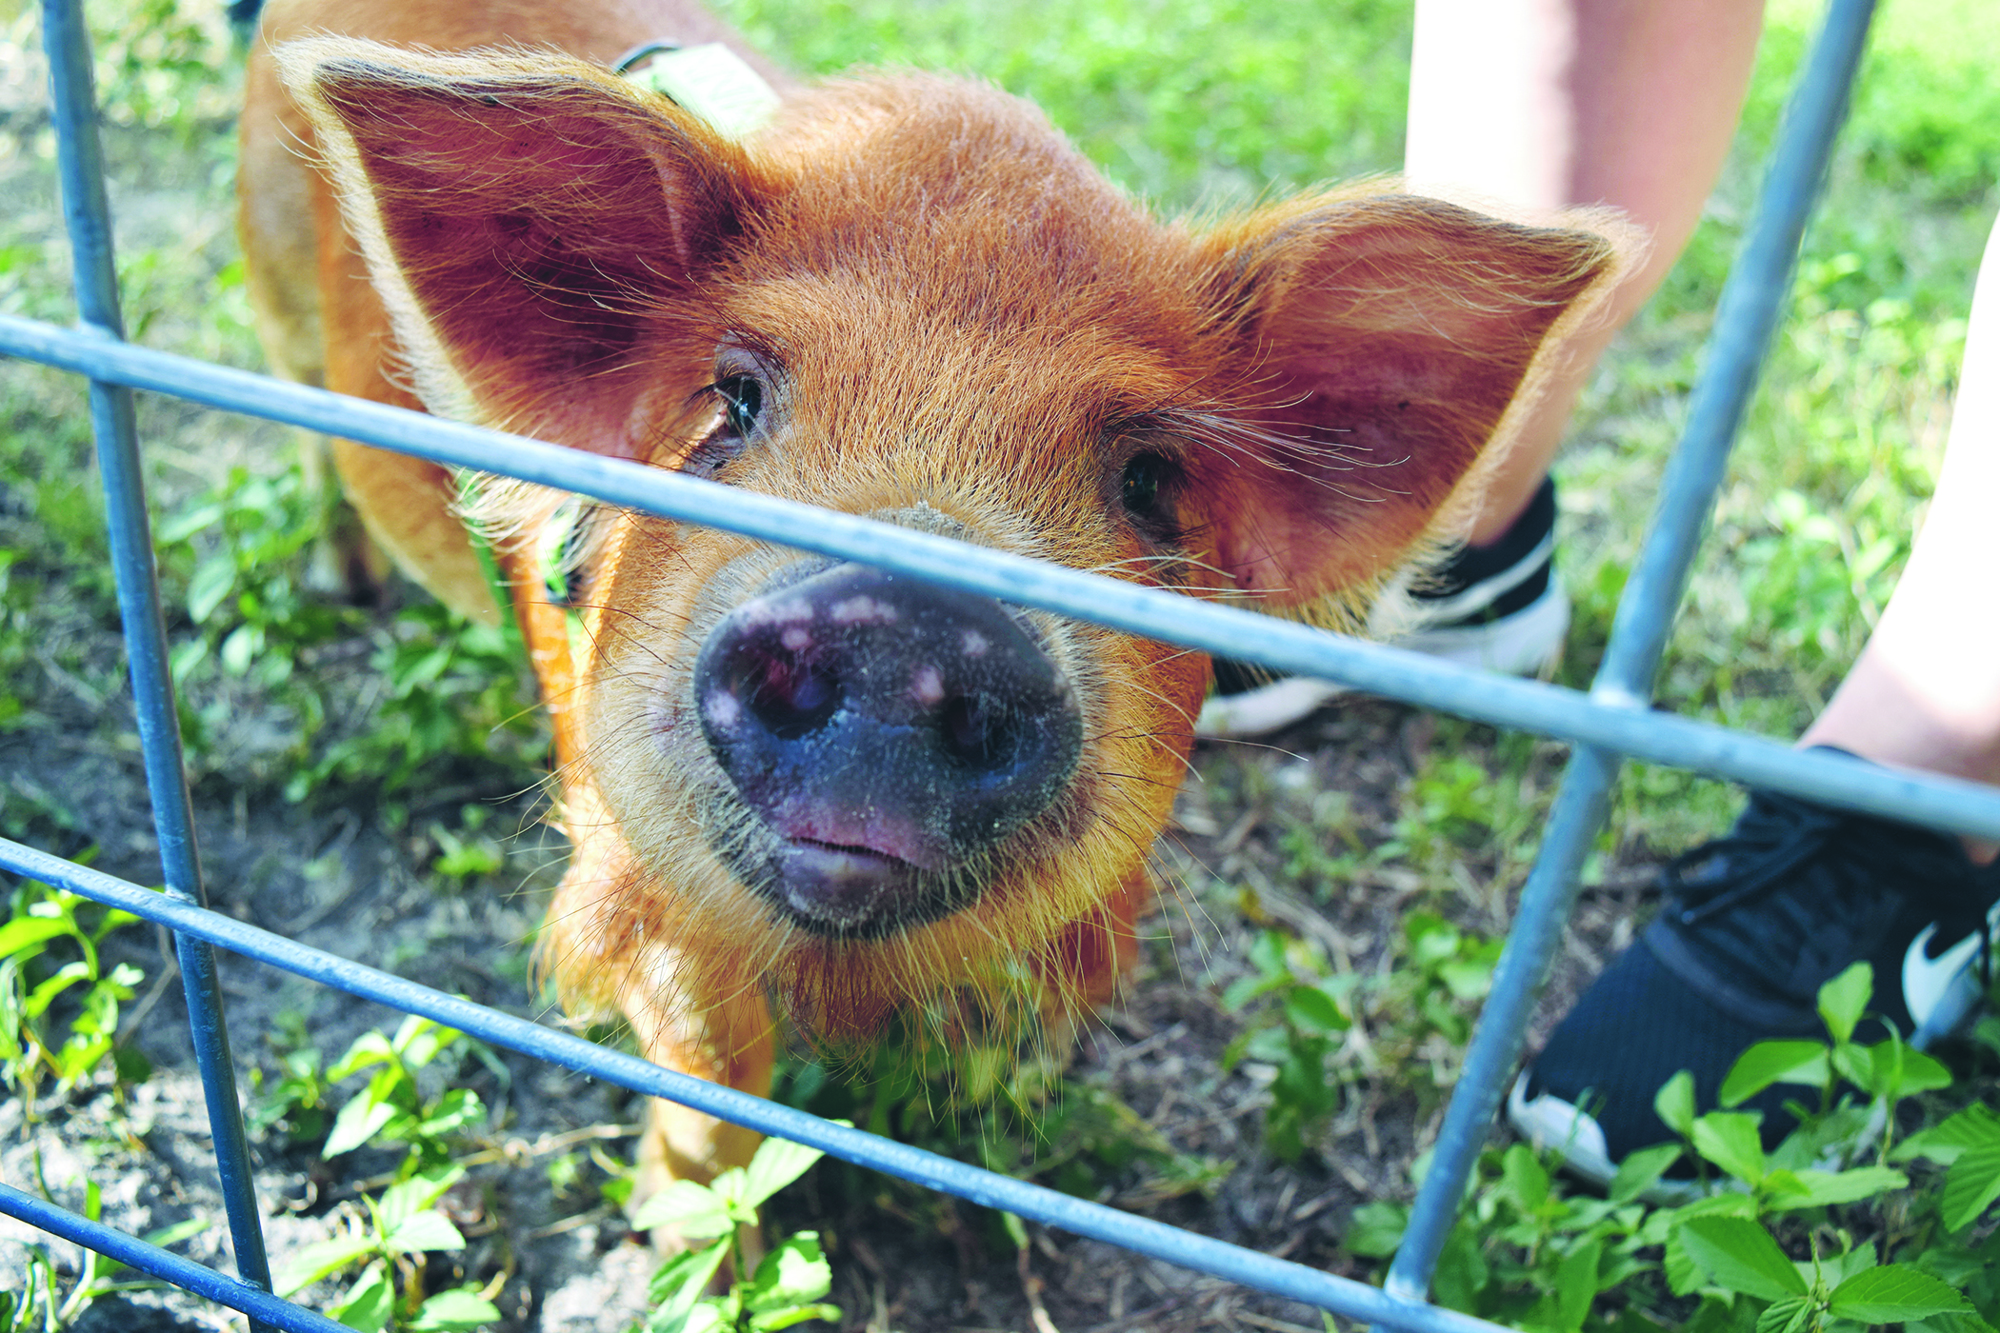 Puddles the pig was not camera shy at WOHS FFA’s Ag-stravaganza event in September.